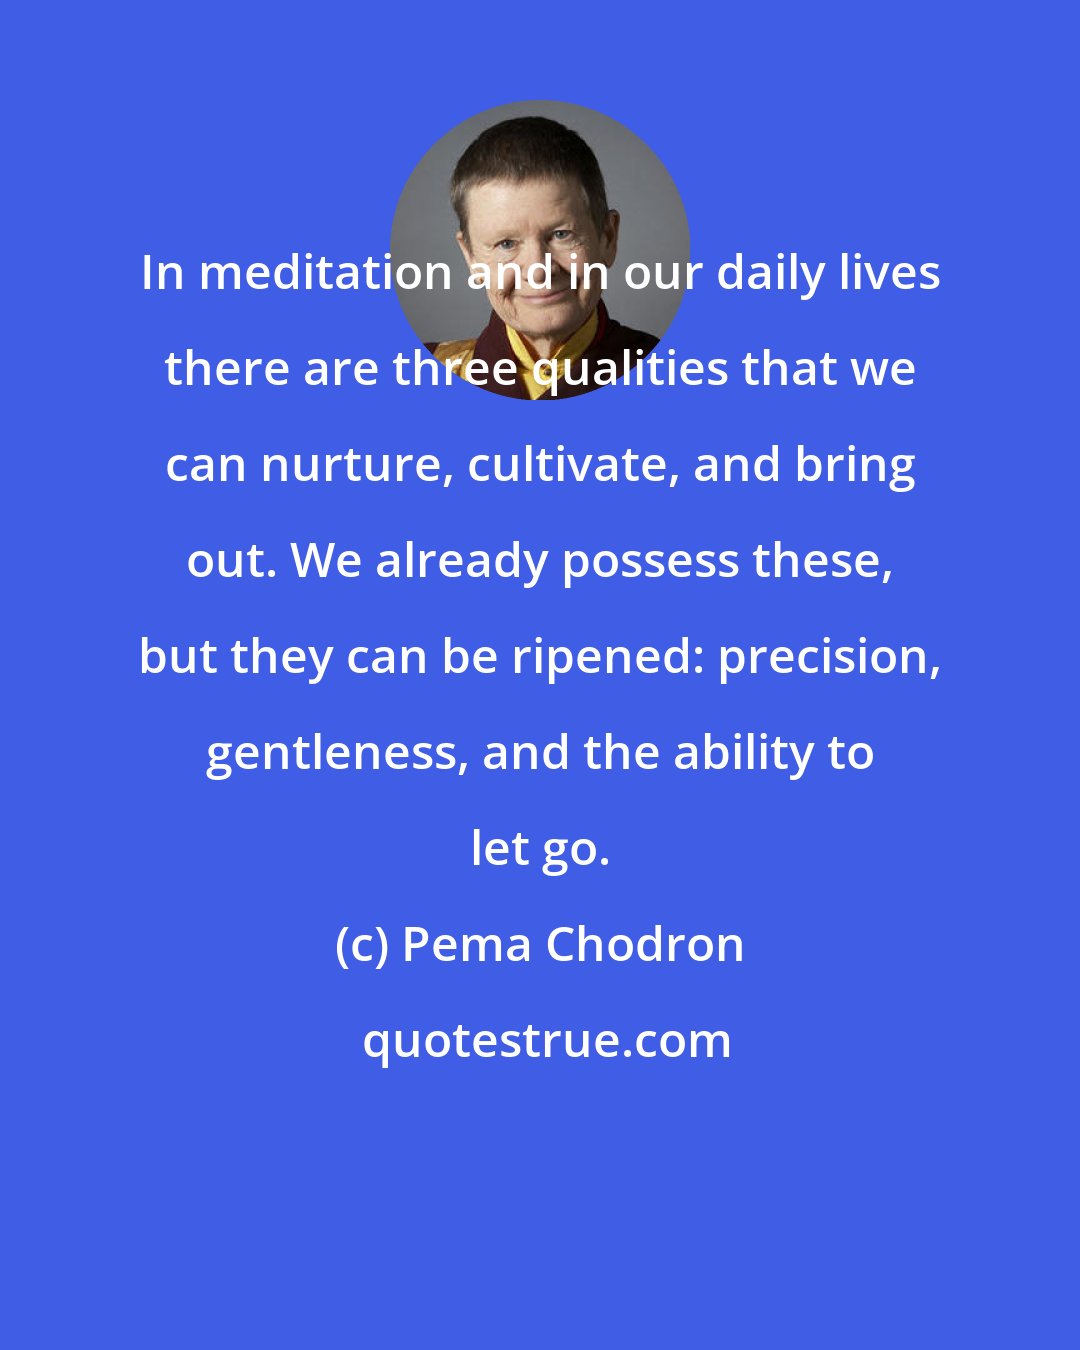 Pema Chodron: In meditation and in our daily lives there are three qualities that we can nurture, cultivate, and bring out. We already possess these, but they can be ripened: precision, gentleness, and the ability to let go.